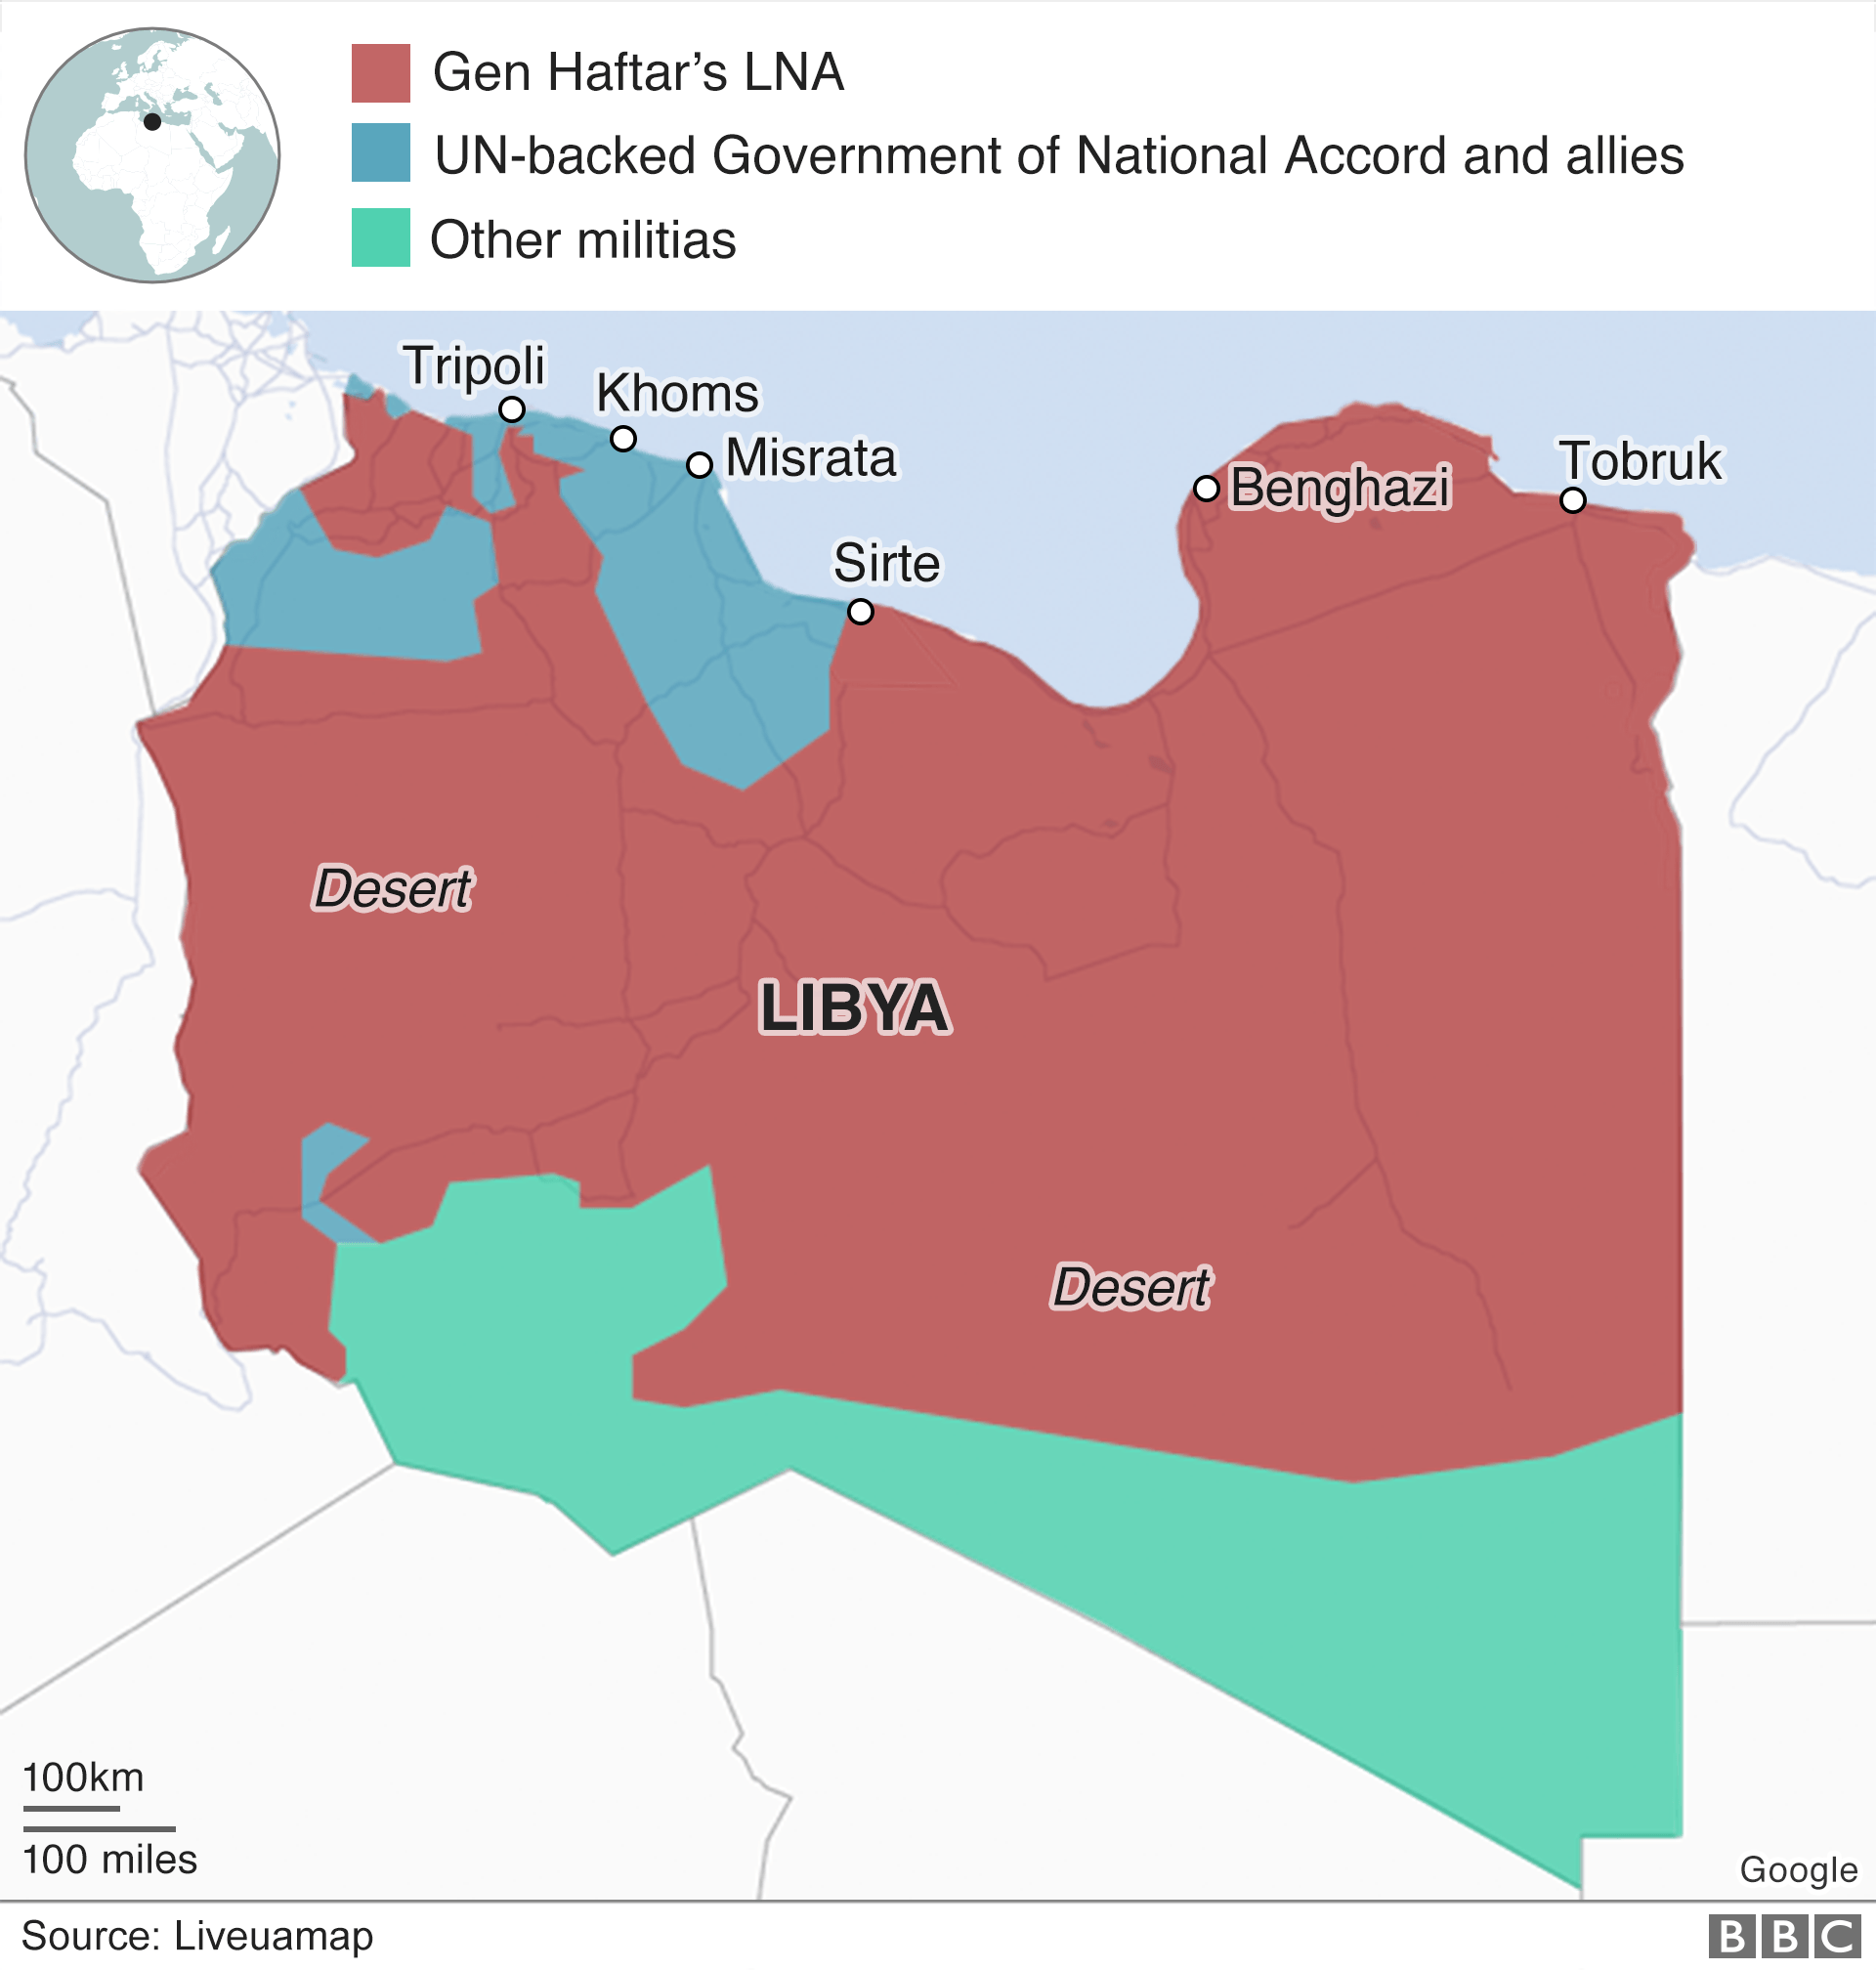 A map shows who controls different parts of Libya